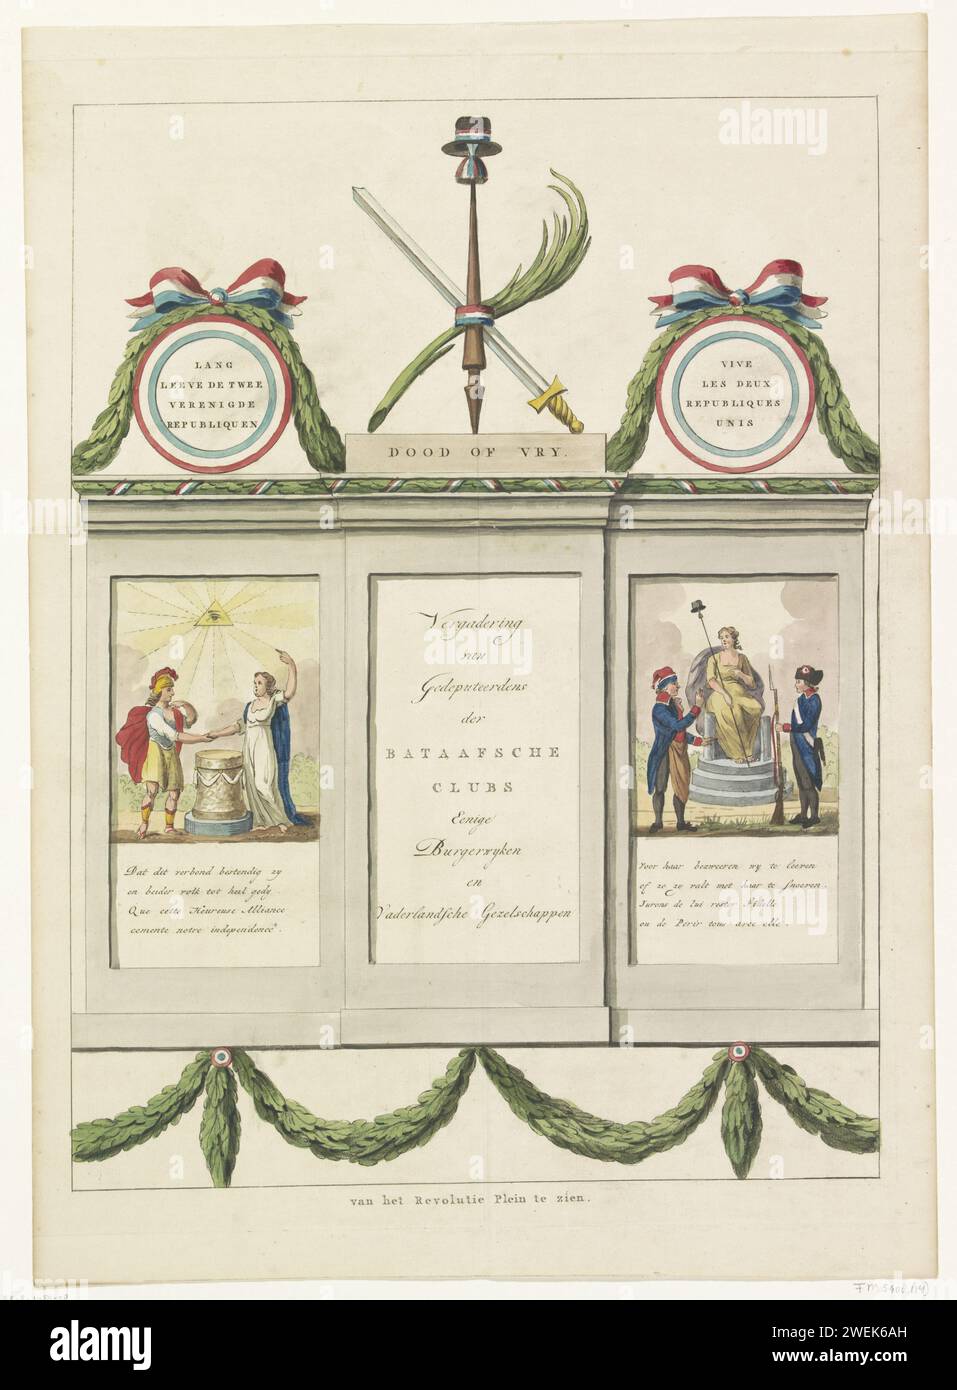 Decoration in the Beurssteeg, 1795, 1795 print Decoration in the Beurssteeg, seen from the Dam, 1795. Founded by a meeting of deputies from the Batavian clubs, civil neighborhoods and national companies in Amsterdam at the Alliantiegeest on June 19, 1795. On the two chassinets allegories of the covenant and freedom, Each with a four -line verse.  paper etching festivities on events of national importance (+ festive decoration  festive activities). Freedom, Liberty; 'LibertÃ ' (Ripa) (+ abstract concept represented by female figure). alliance, league, union, foedus Amsterdam. Beurssteeg Stock Photo